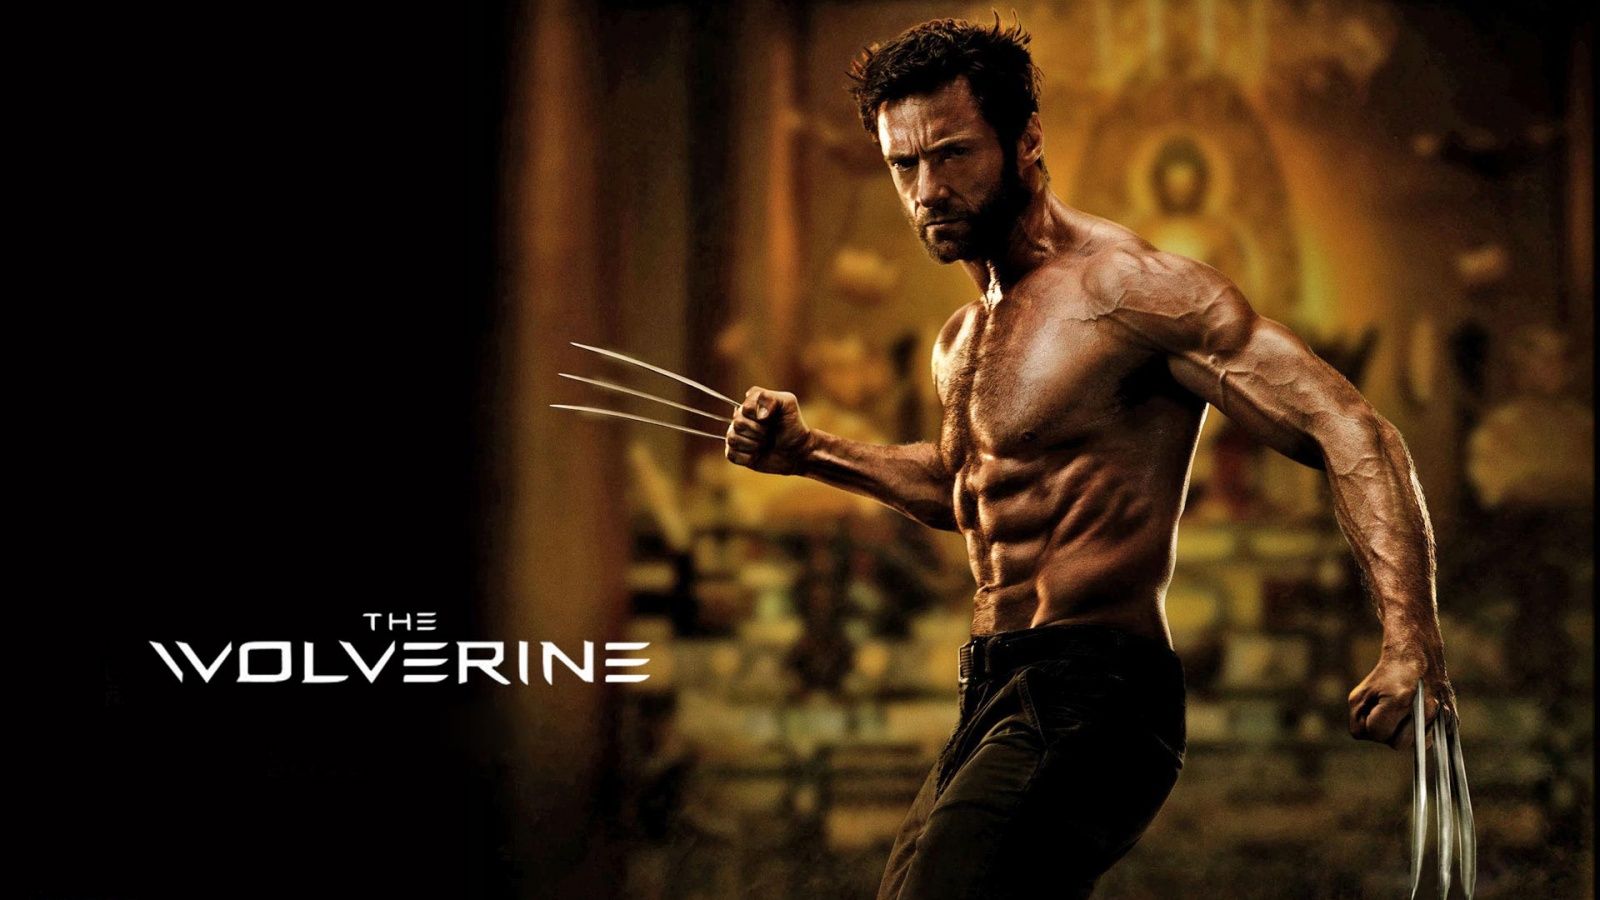 The Wolverine 2013 Movie Wallpapers | HD Wallpapers